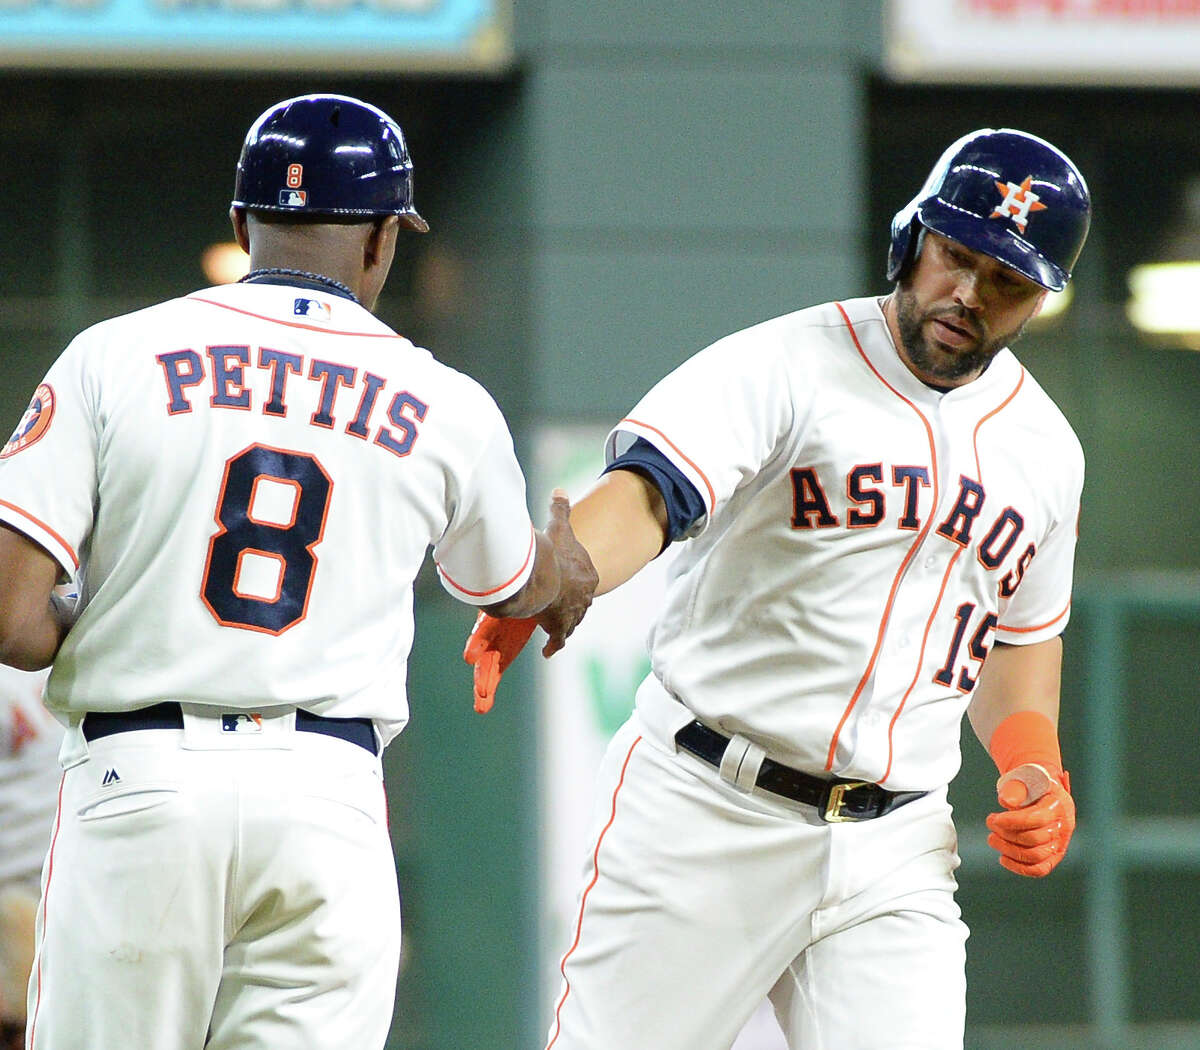 Houston Astros' Carlos Beltran (15) is congratulated by third base coach Gary Pettis after hitting a solo home run against the Los Angeles Angels in the first inning Thursday in Houston.